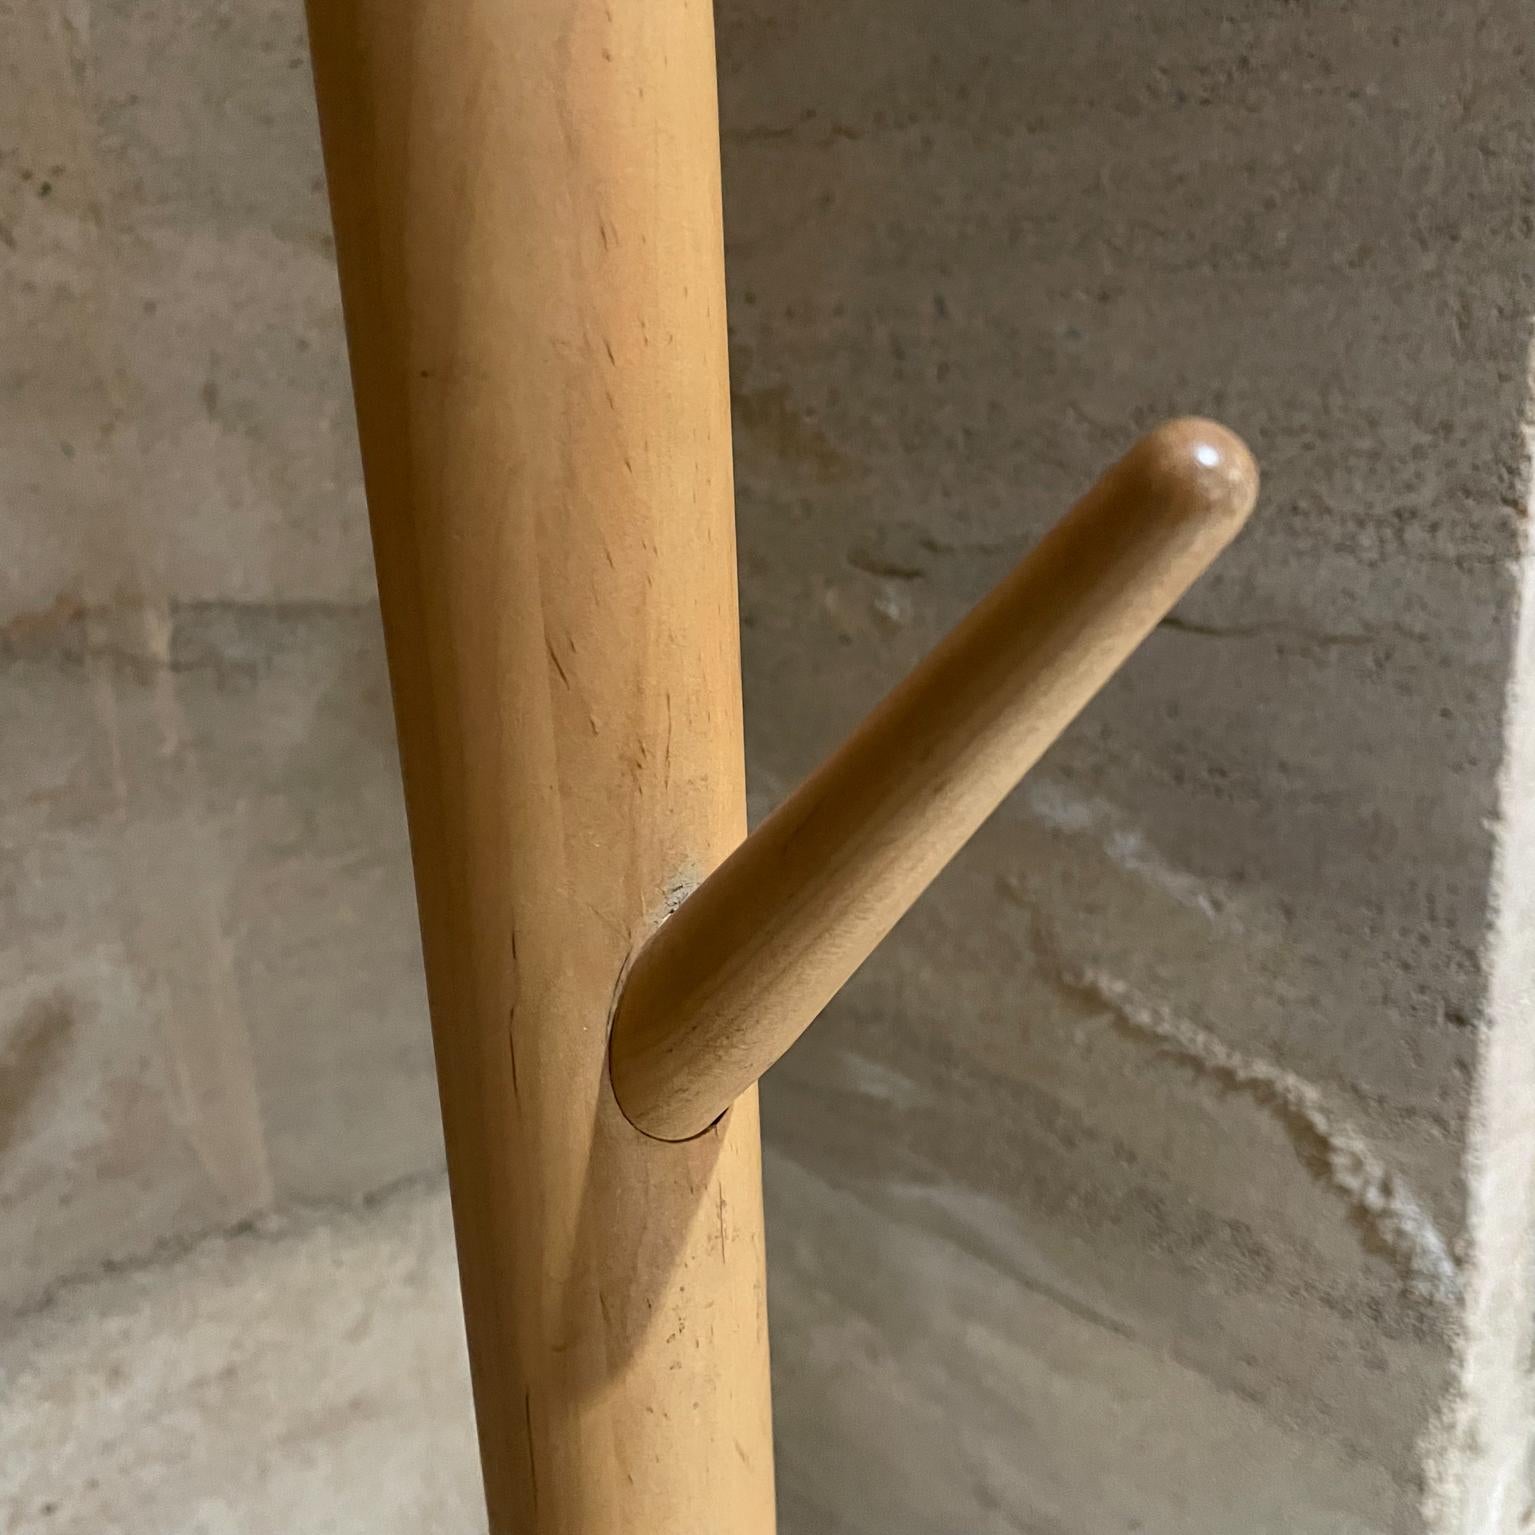 Matthew Weatherly Thorn Coat Rack Free Standing Maple Wood Missouri In Good Condition For Sale In Chula Vista, CA